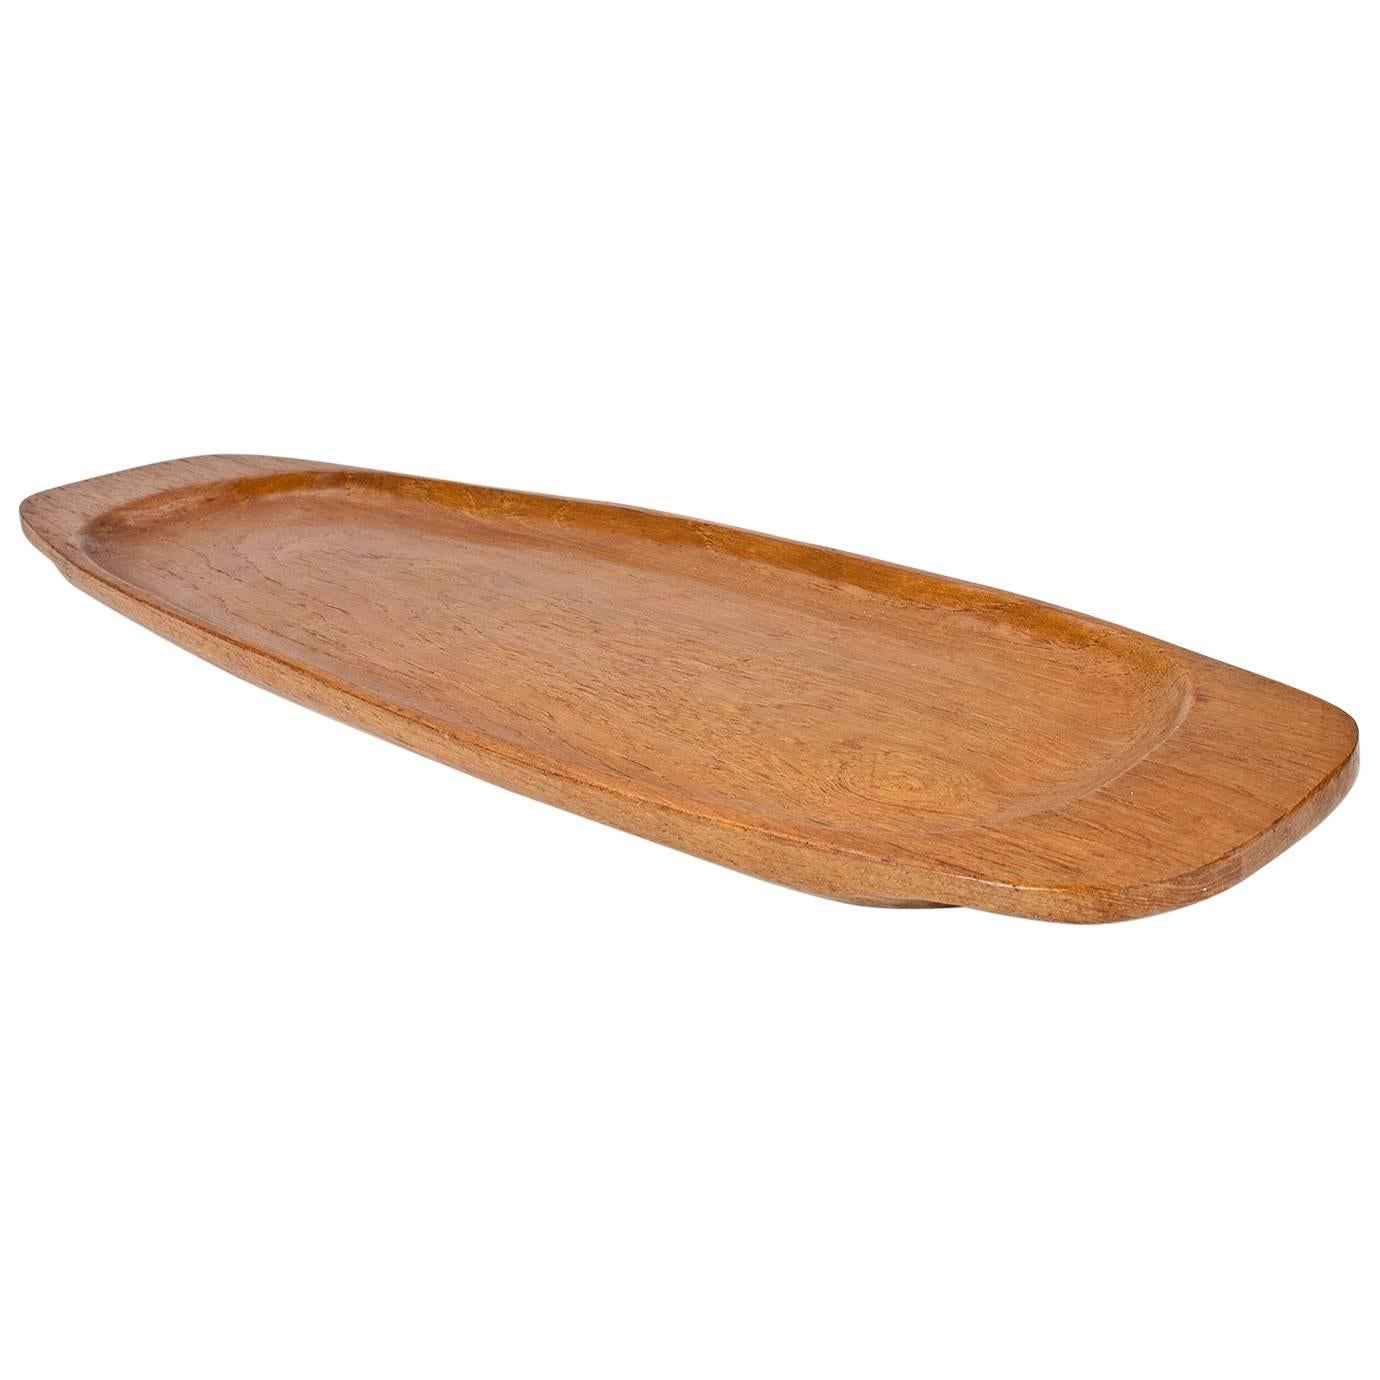 1960s Vintage Teak Hand Moulded Tray or Table Piece 1960s Denmark For Sale